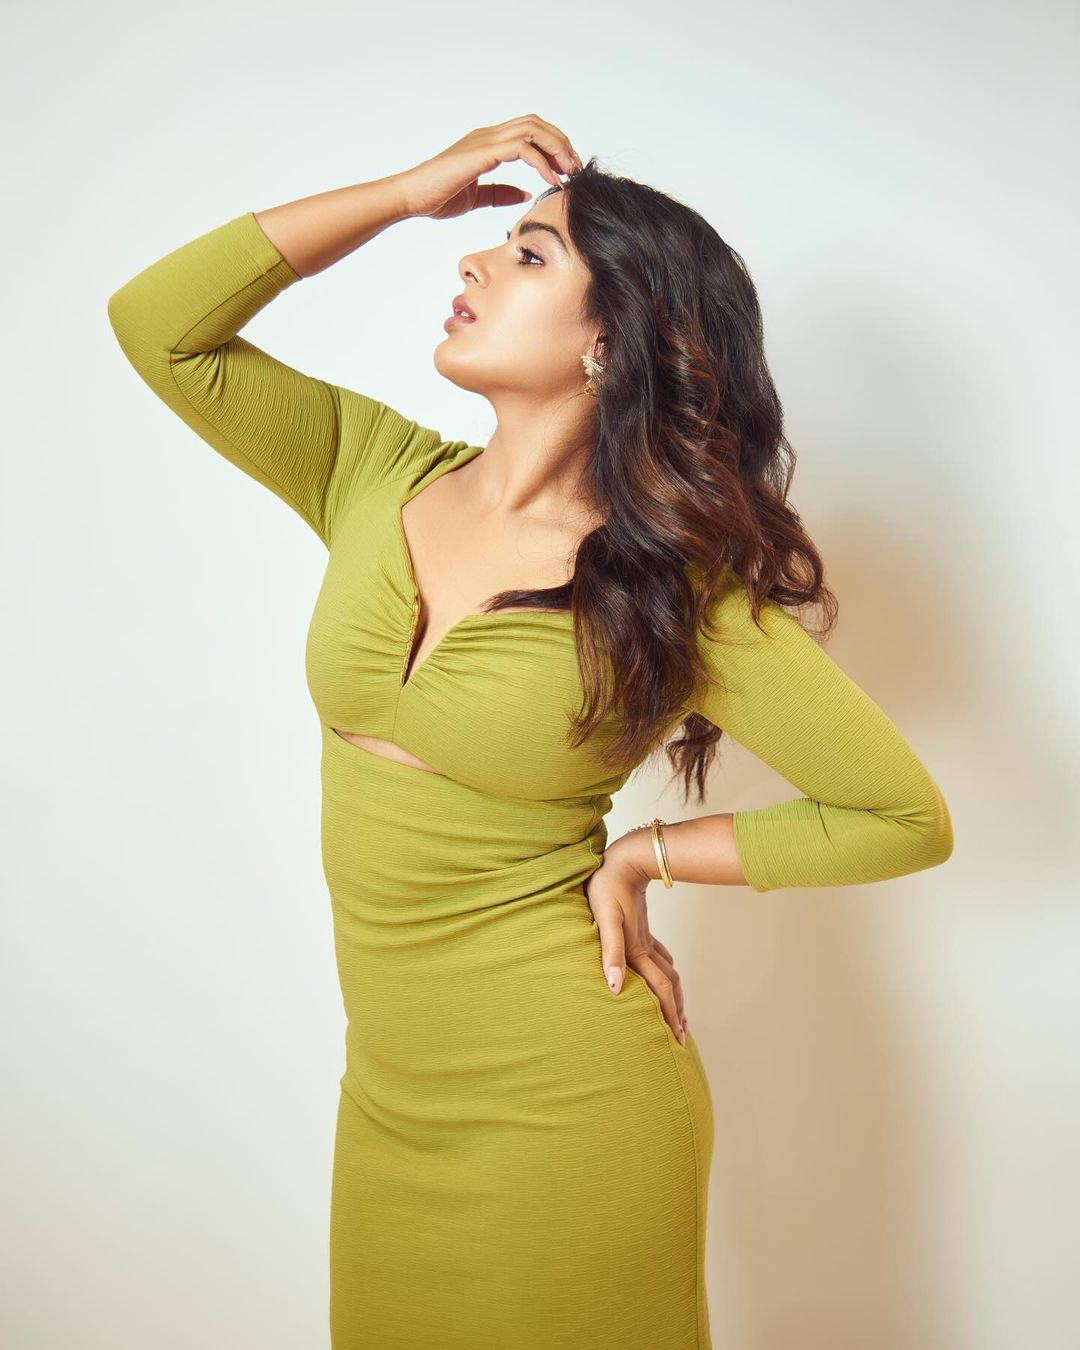 Pic Talk: Hot Lady’s Hot Show In Tight Dress